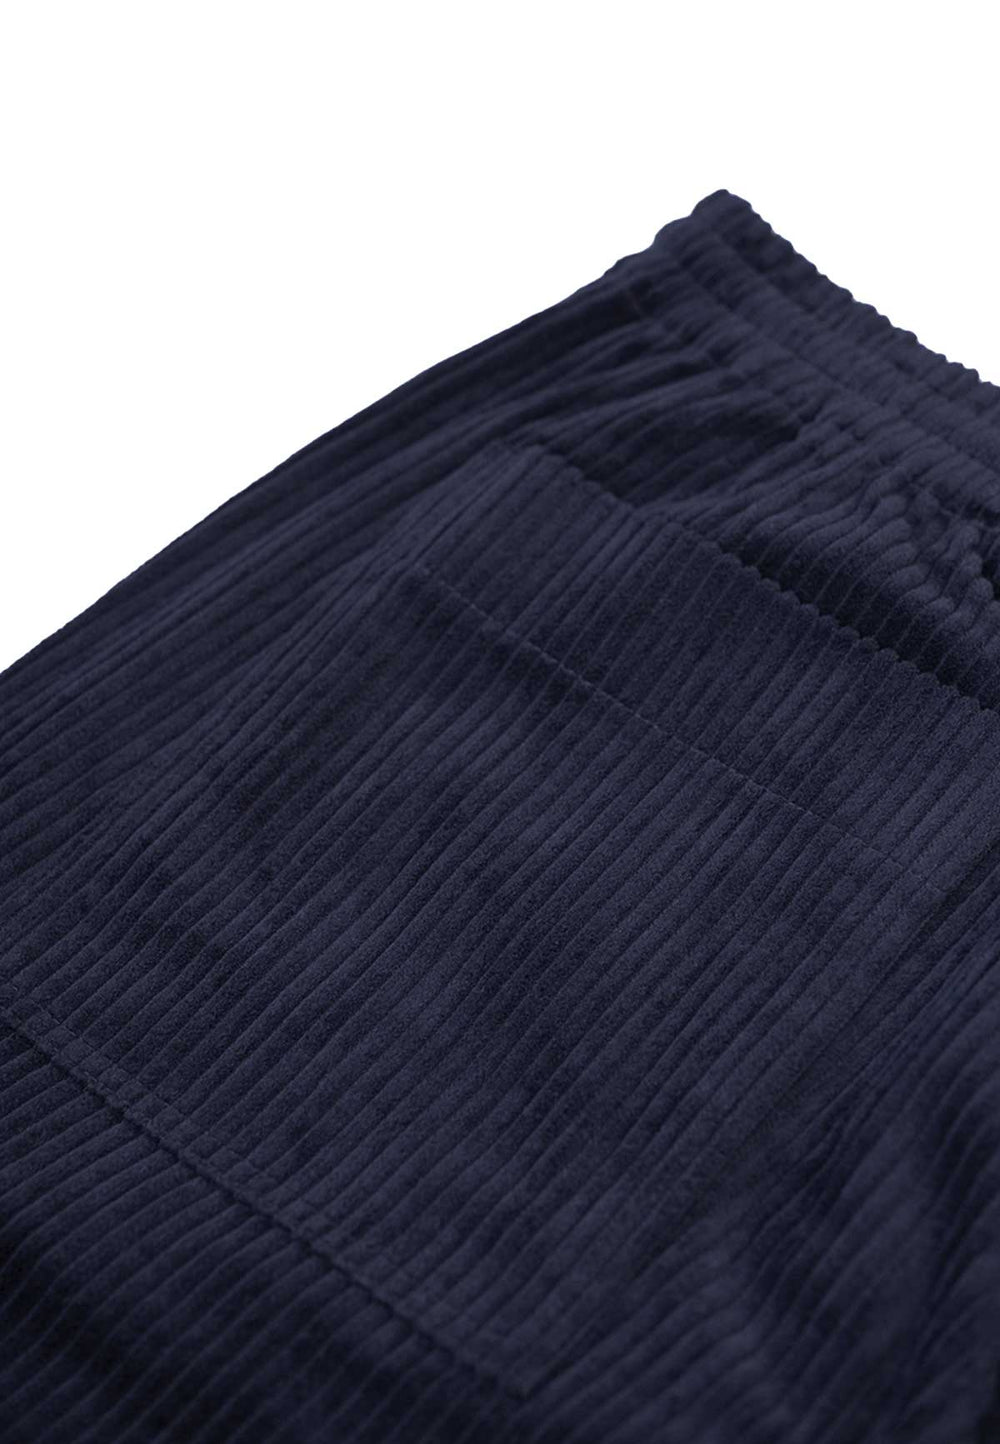 Close up of the back pocket of wide corduroy pants in navy.